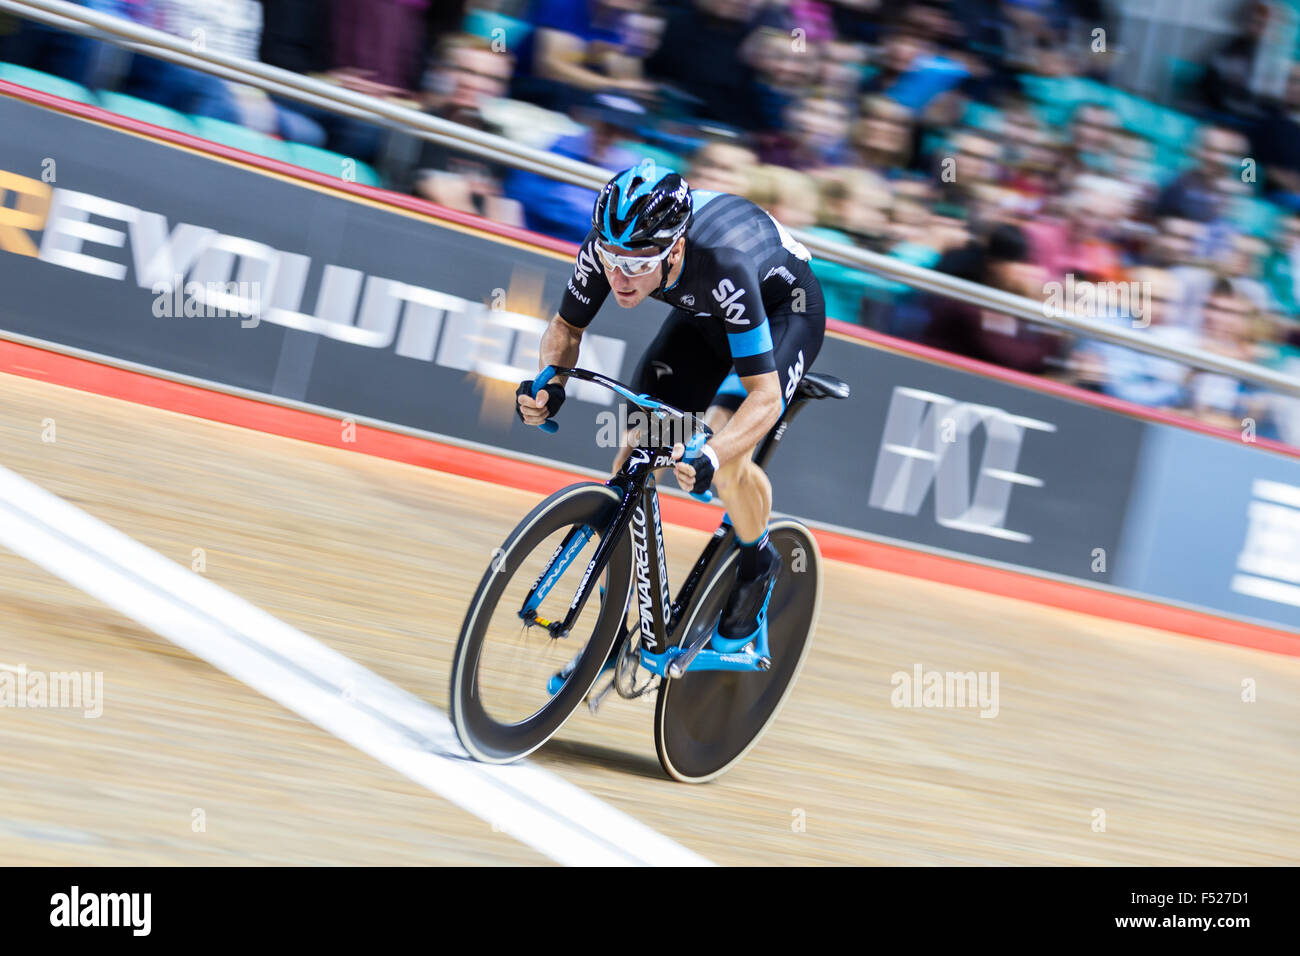 Italian Elia Viviani competes during the Revolution cycling competition at the National Cycling Centre, Manchester UK Stock Photo